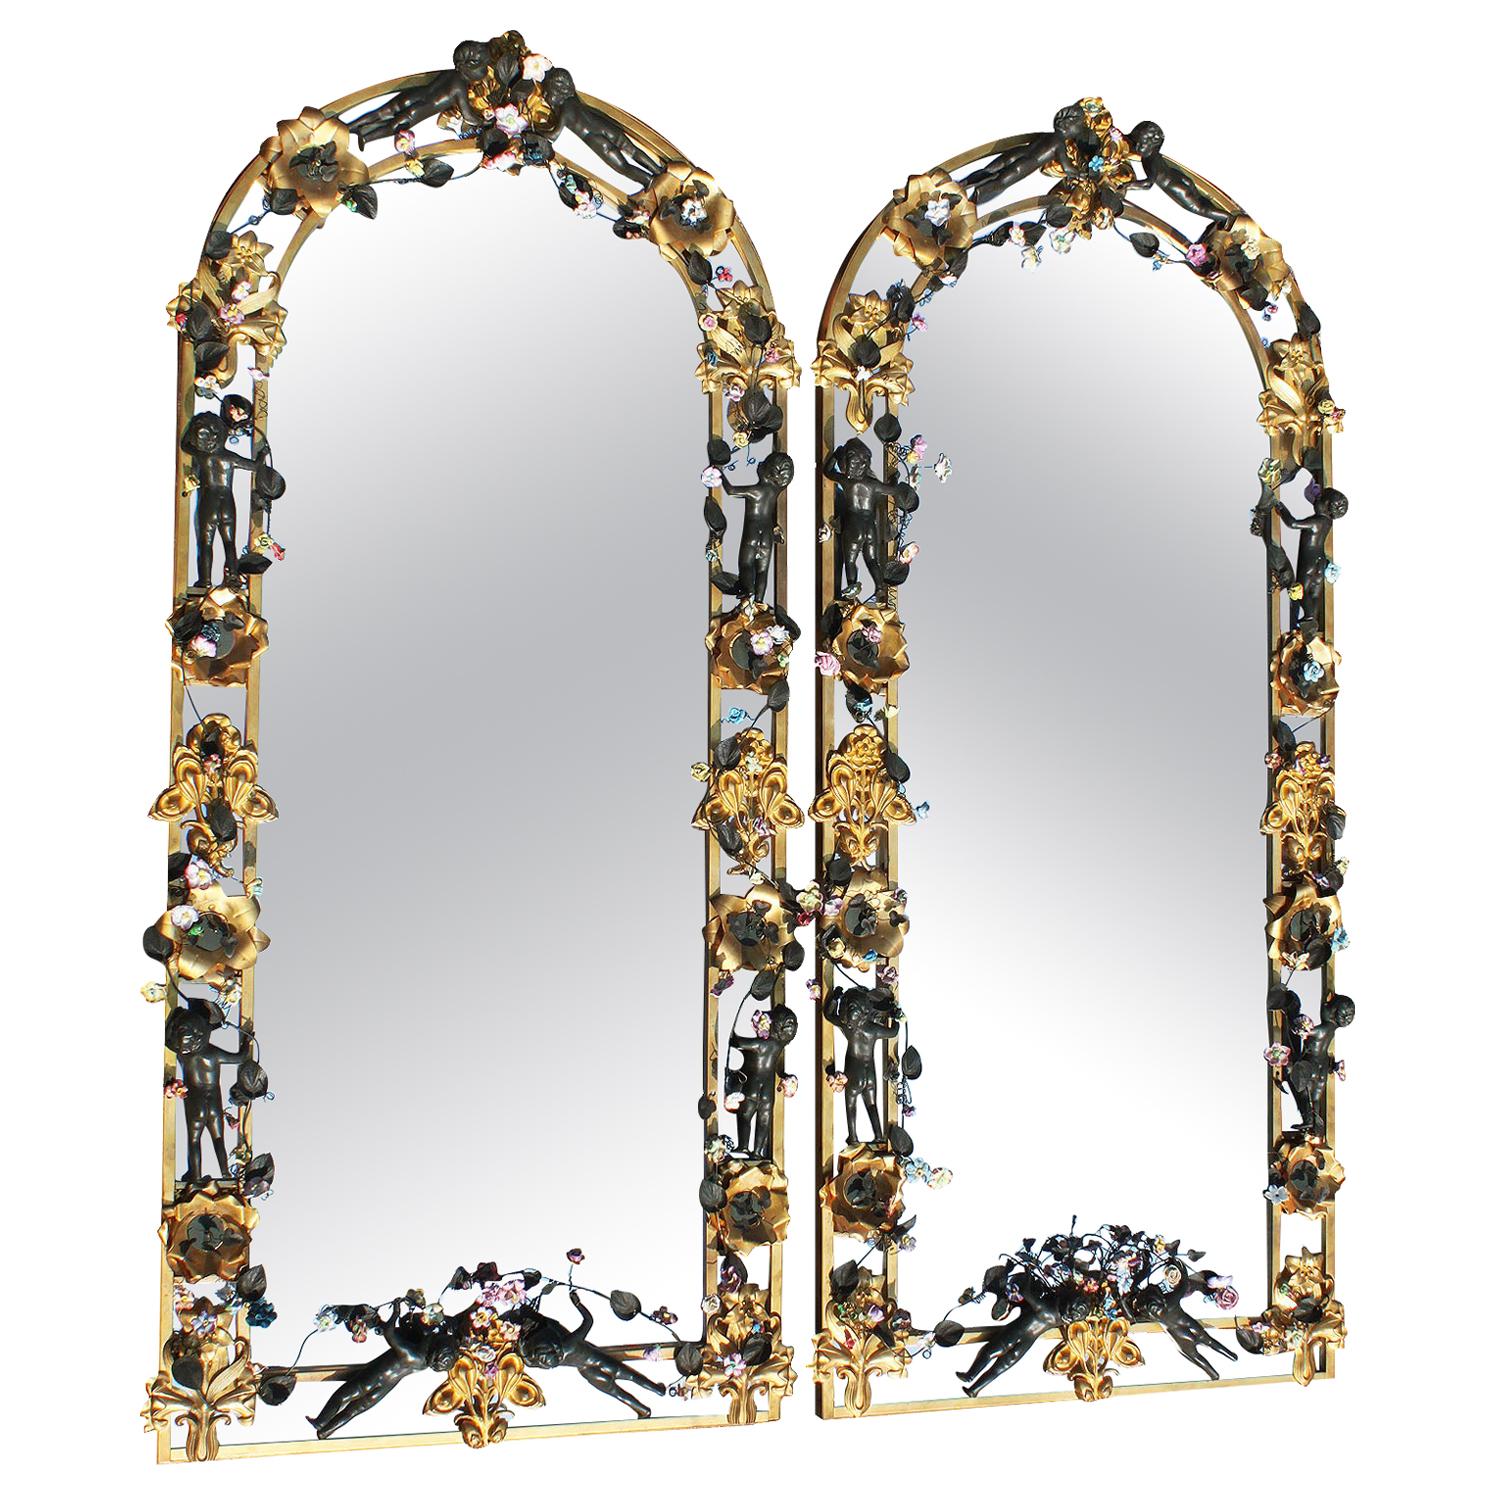 French Whimsical 19th-20th Century Belle Époque Bronze & Porcelain Mirrors, Pair